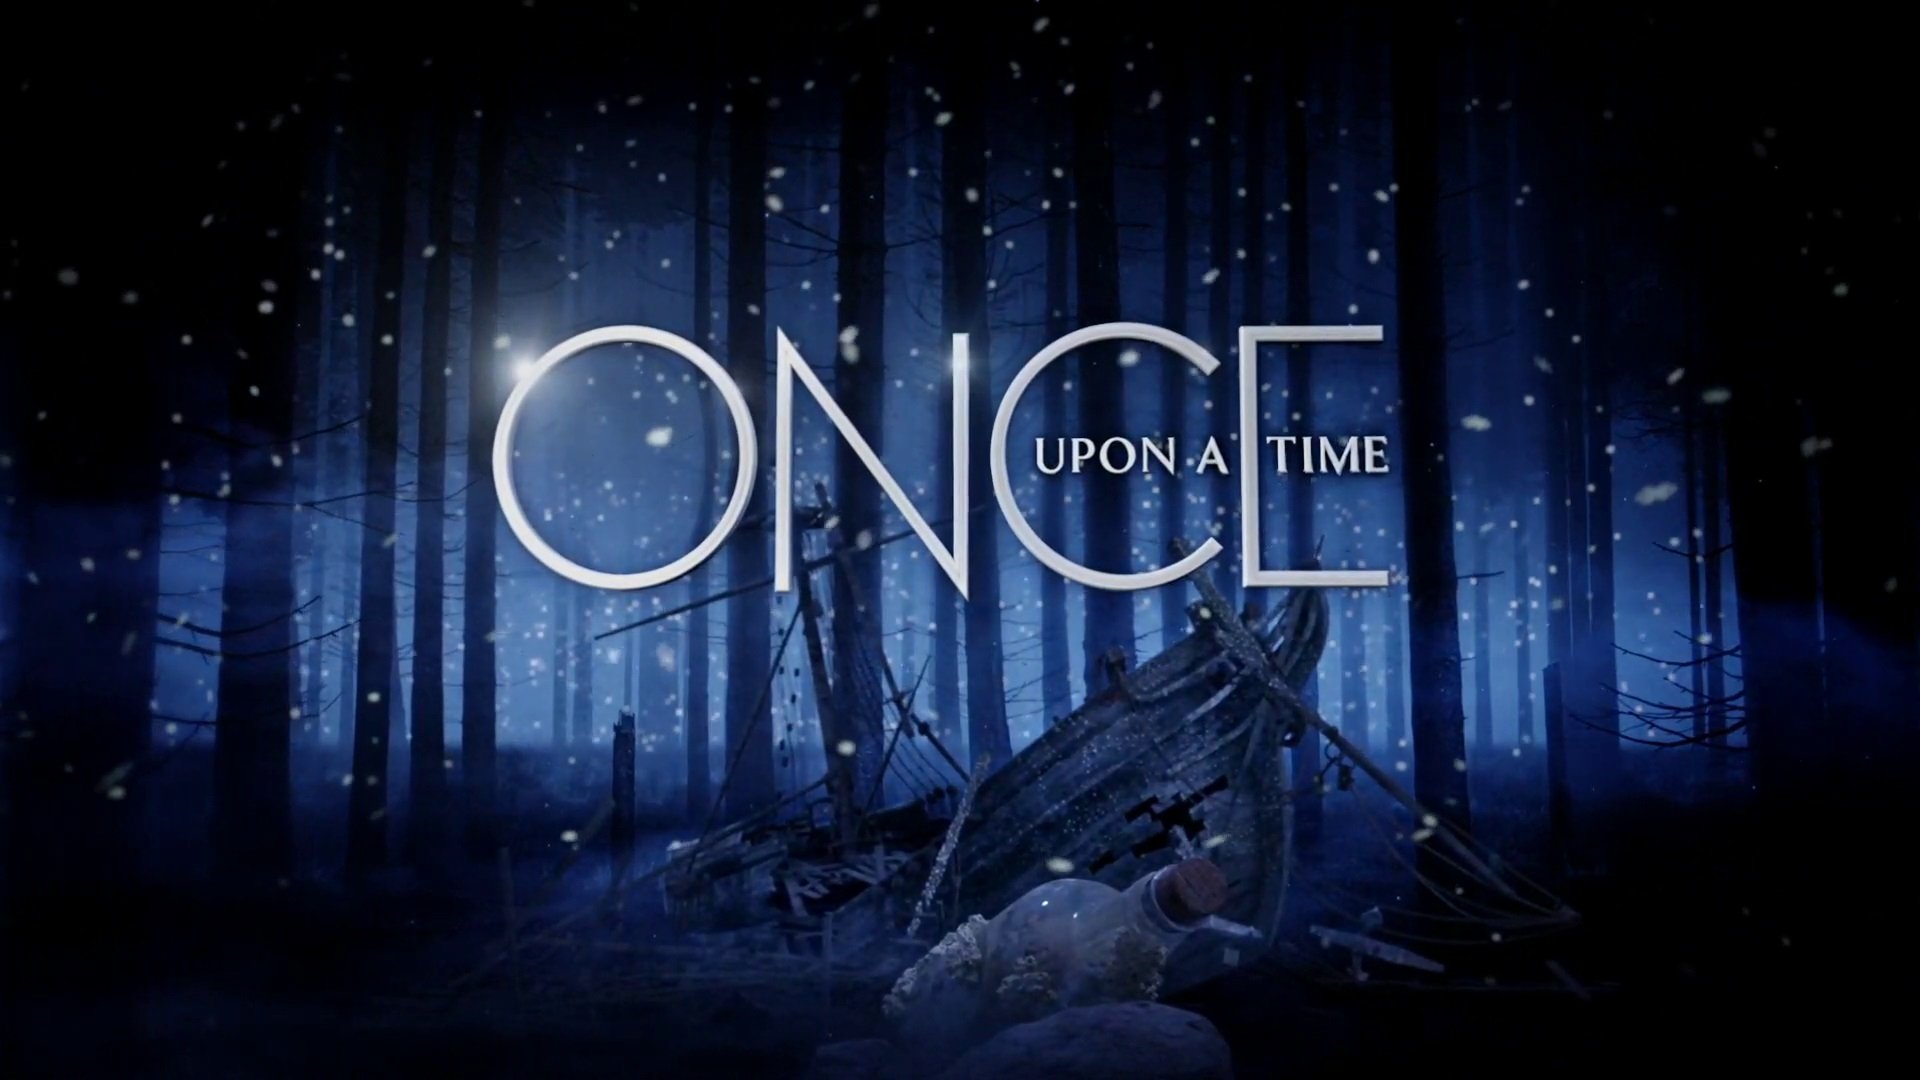 Once Upon A Time Fantasy Drama Mystery